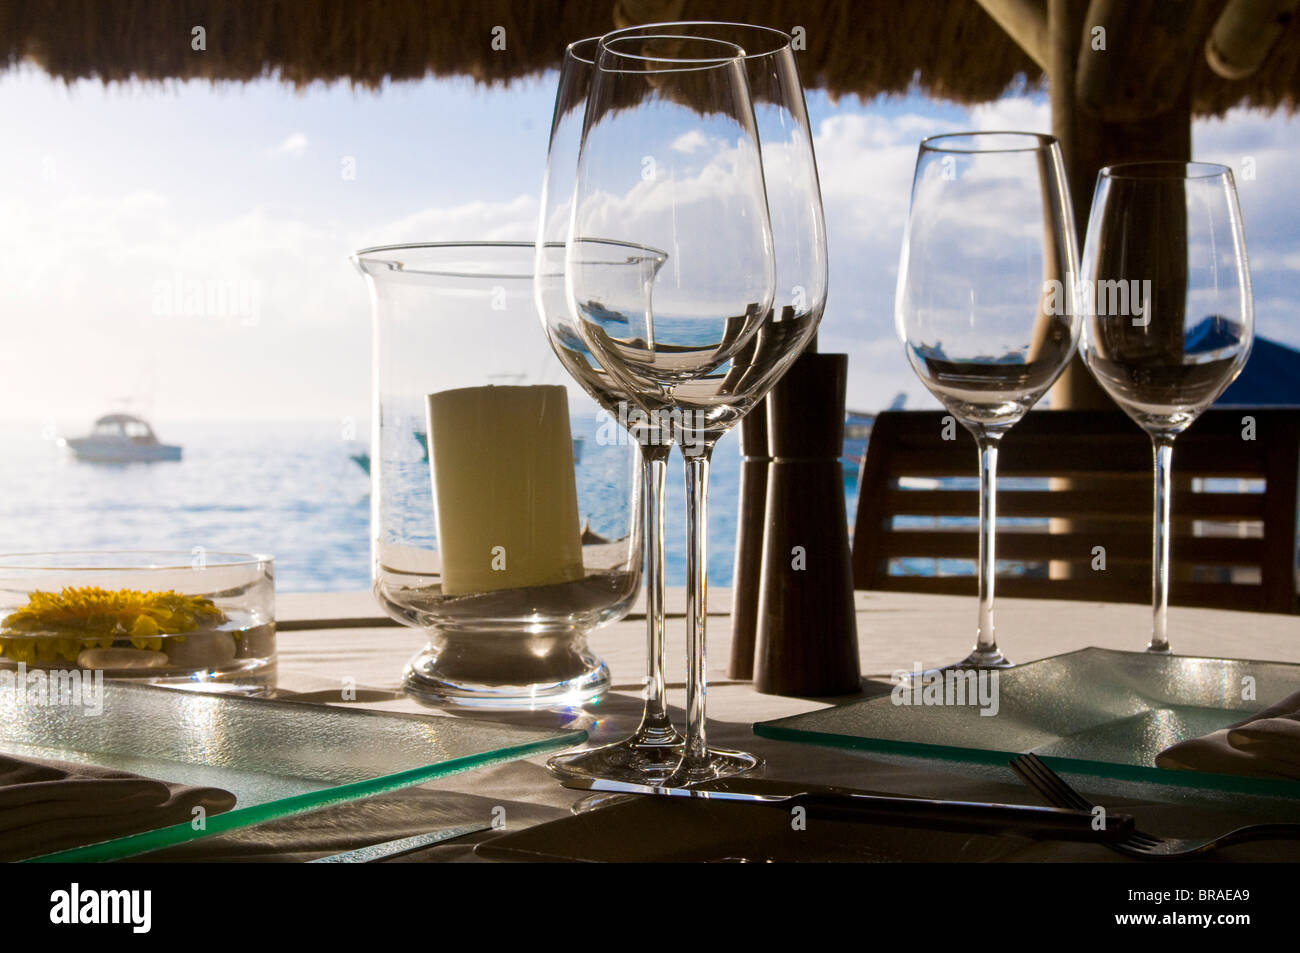 Glasses on a table of the Beachcomber Le Paradis five star hotel, Mauritius, Indian Ocean, Africa Stock Photo